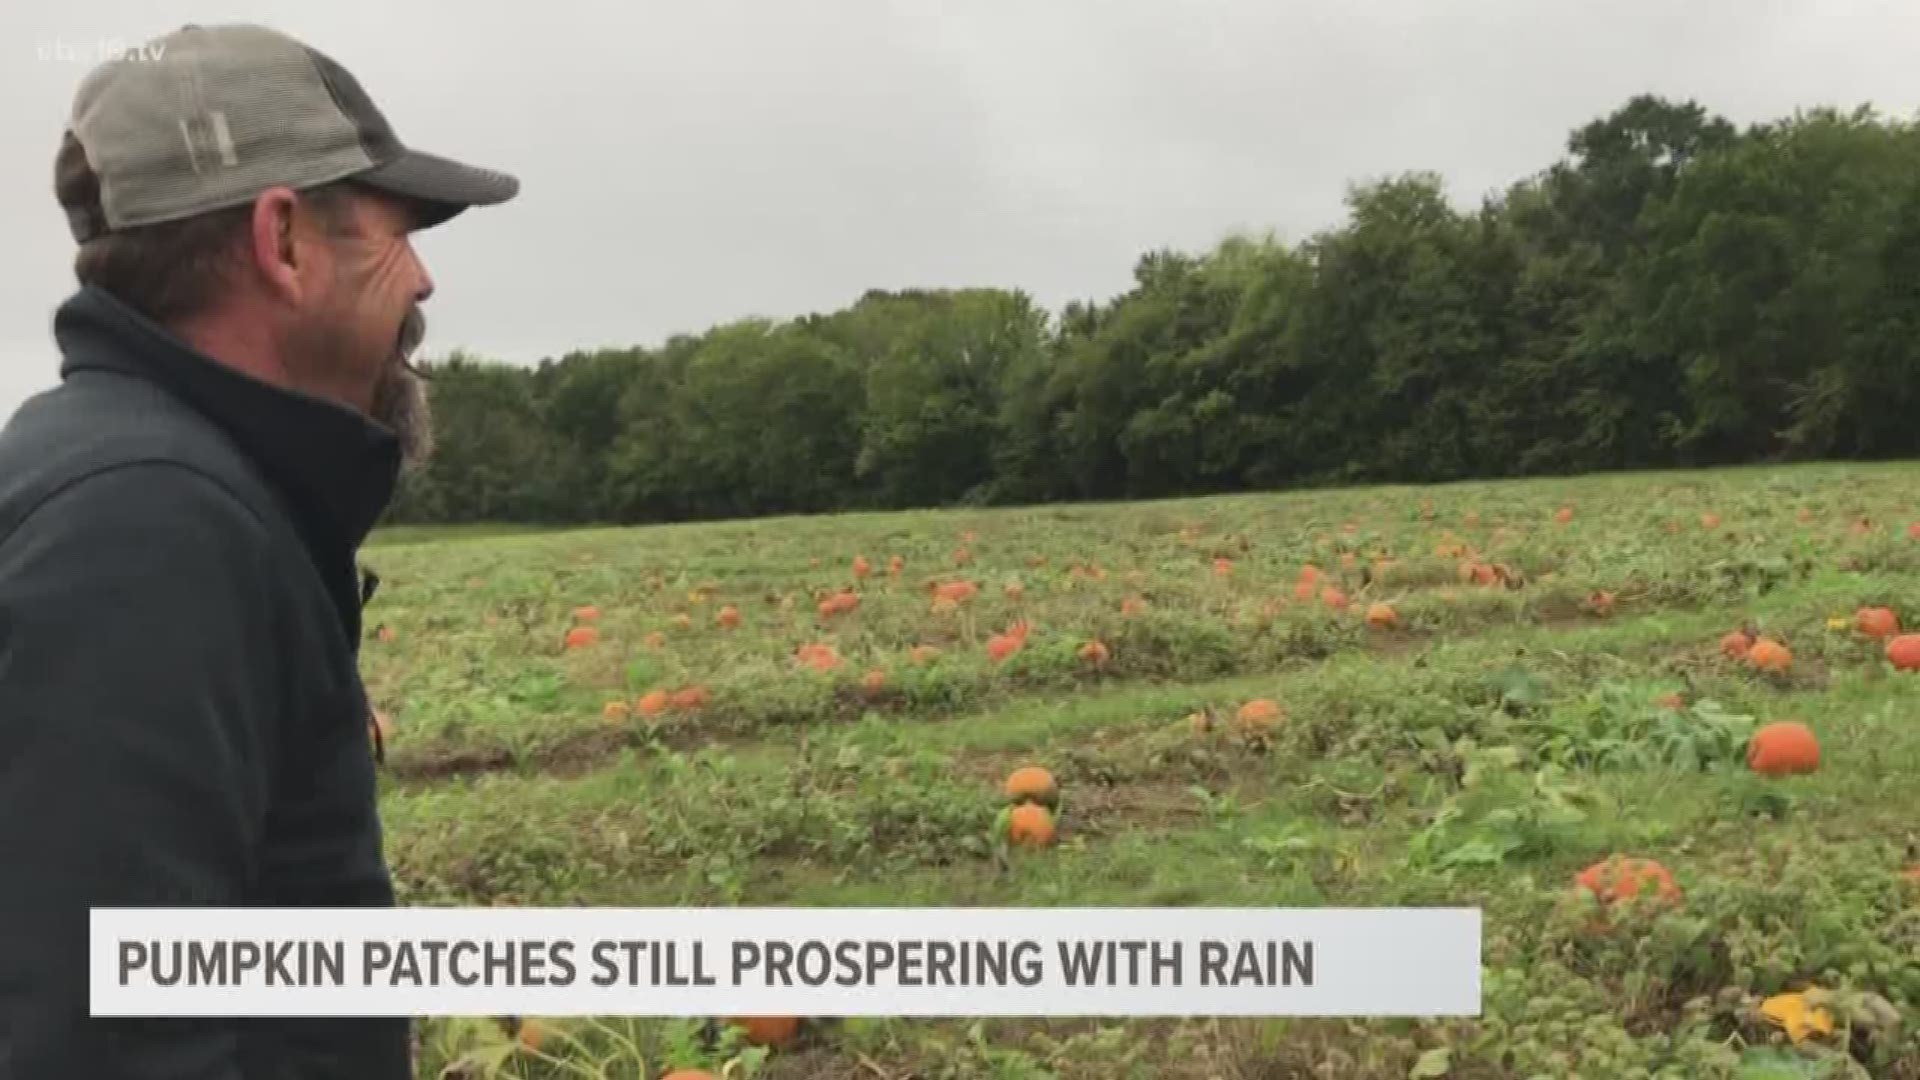 AN EAST TEXAS GROWER TAKES US THROUGH HIS PUMPKIN FARM AFTER SEVERE STORMS THIS PAST WEEKEND.